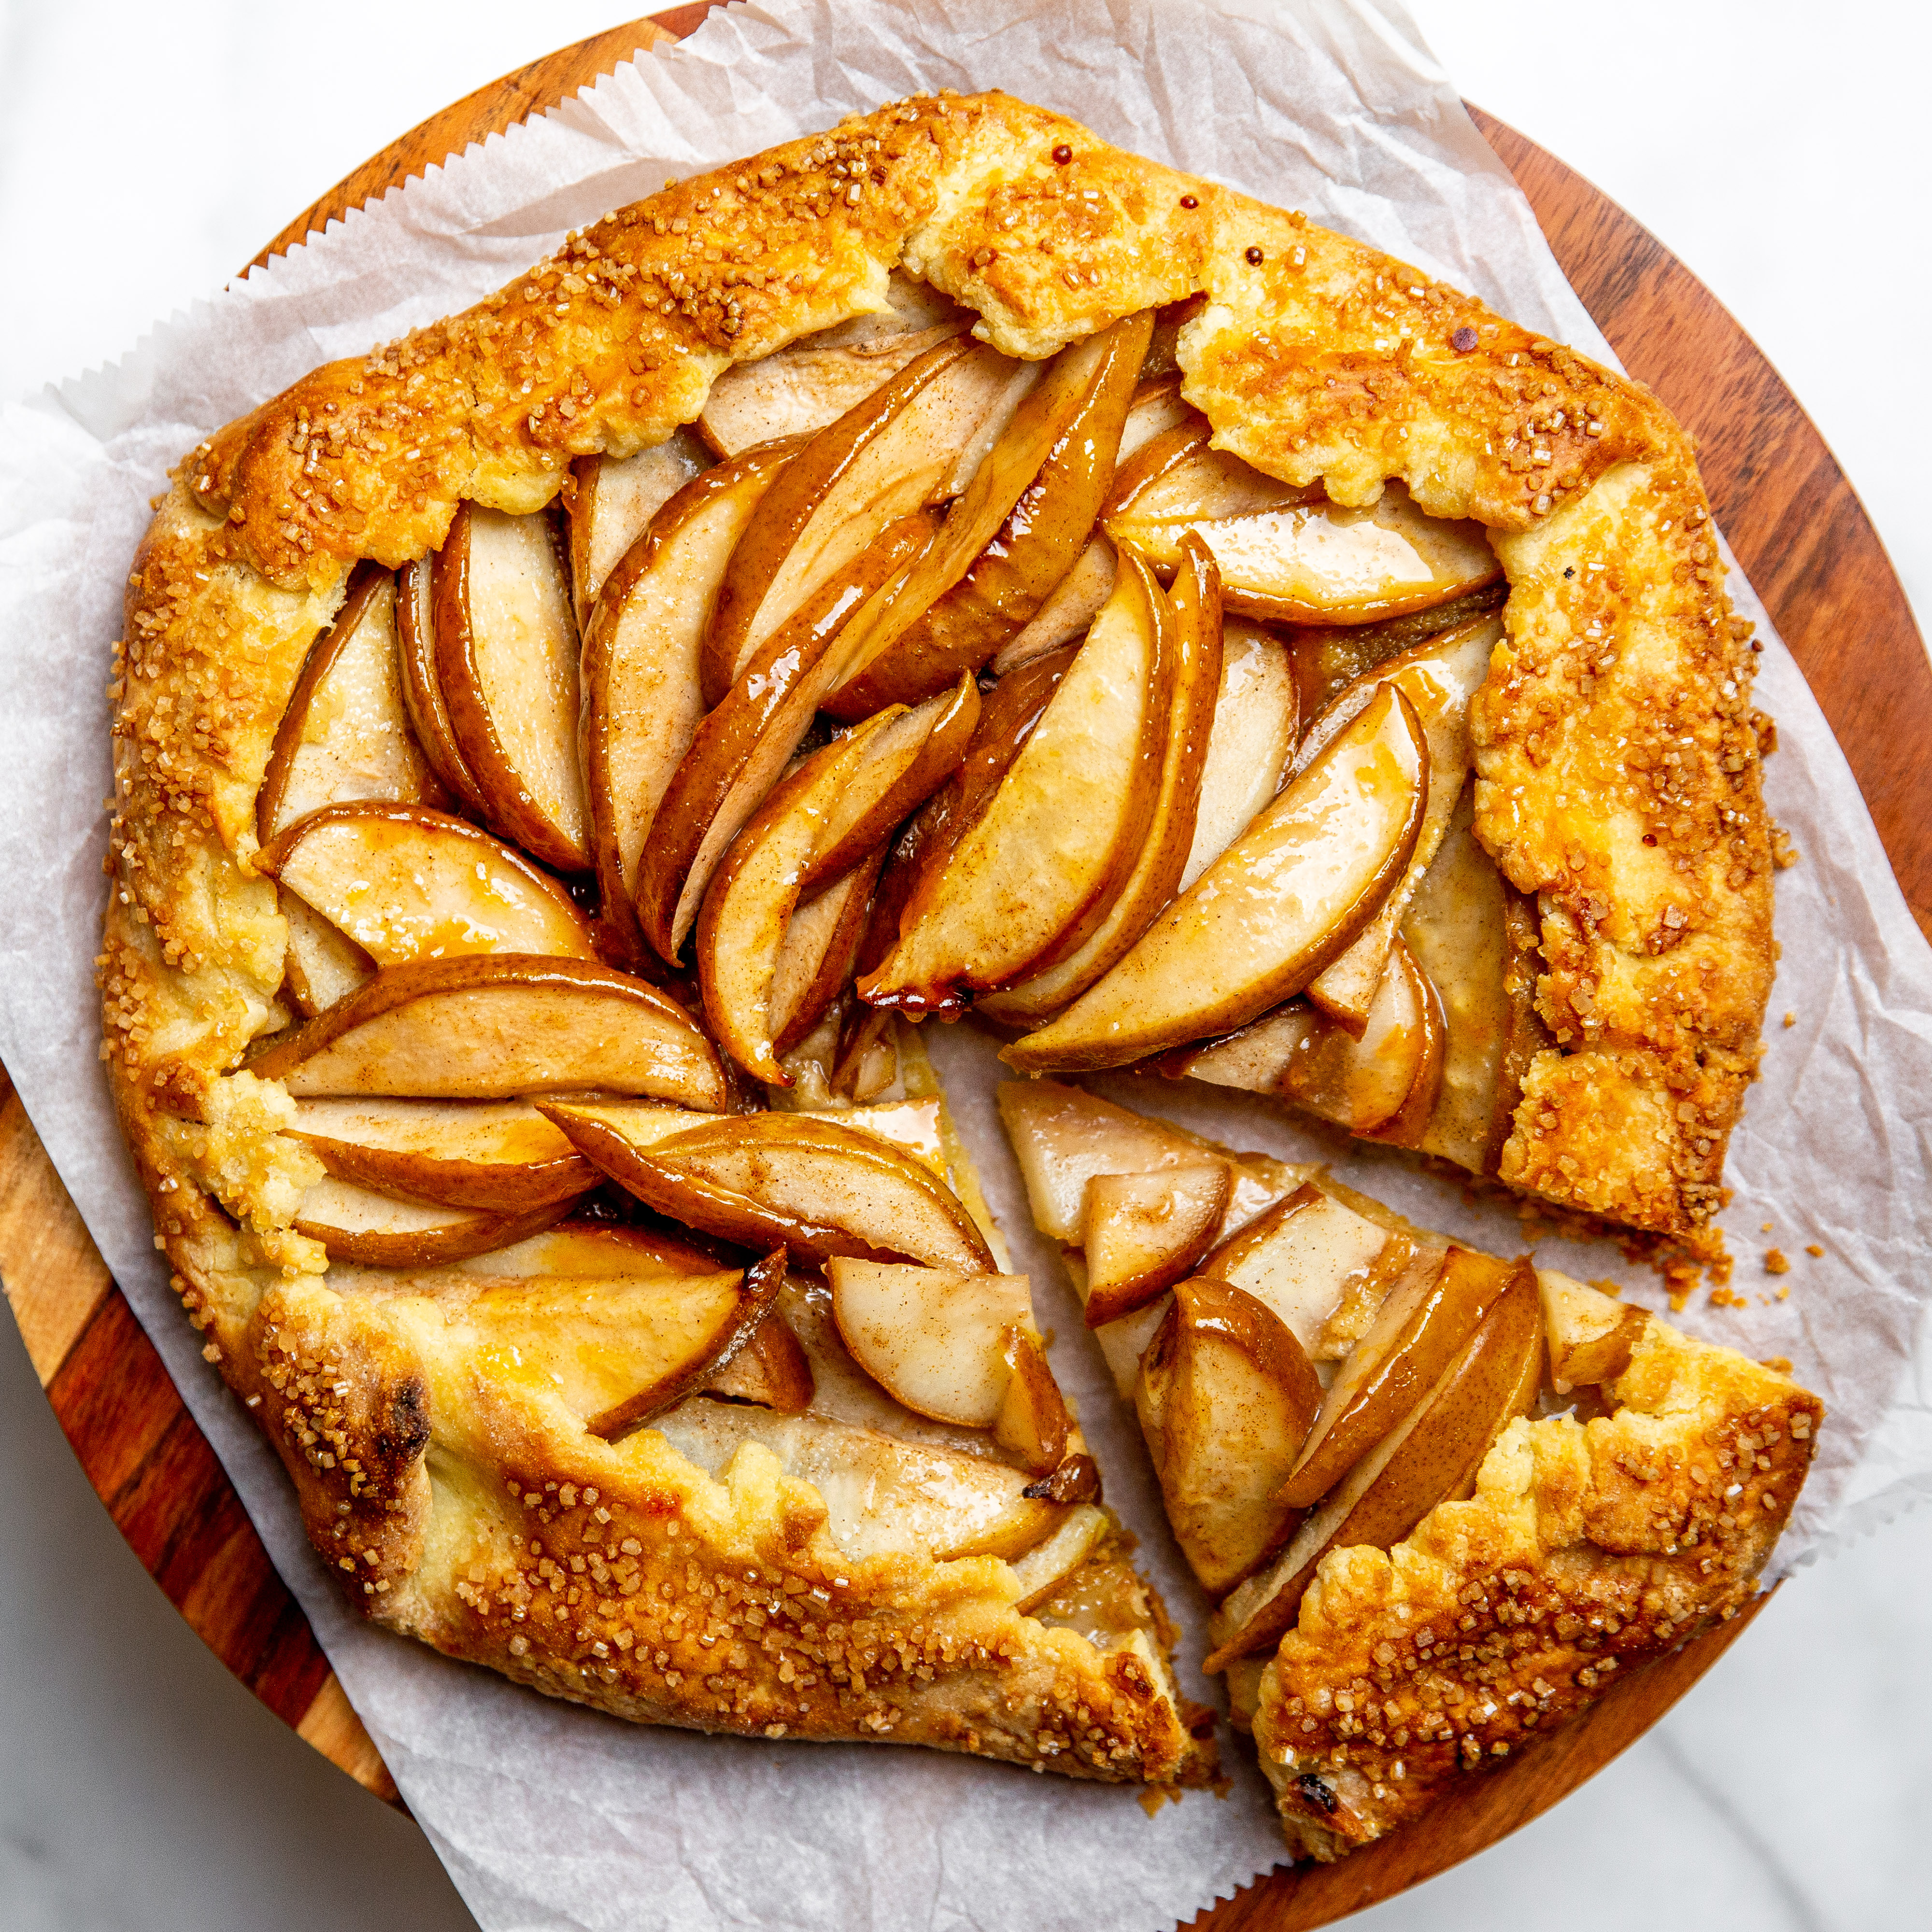 Gluten free pear and almond galette on a wooden serving board.